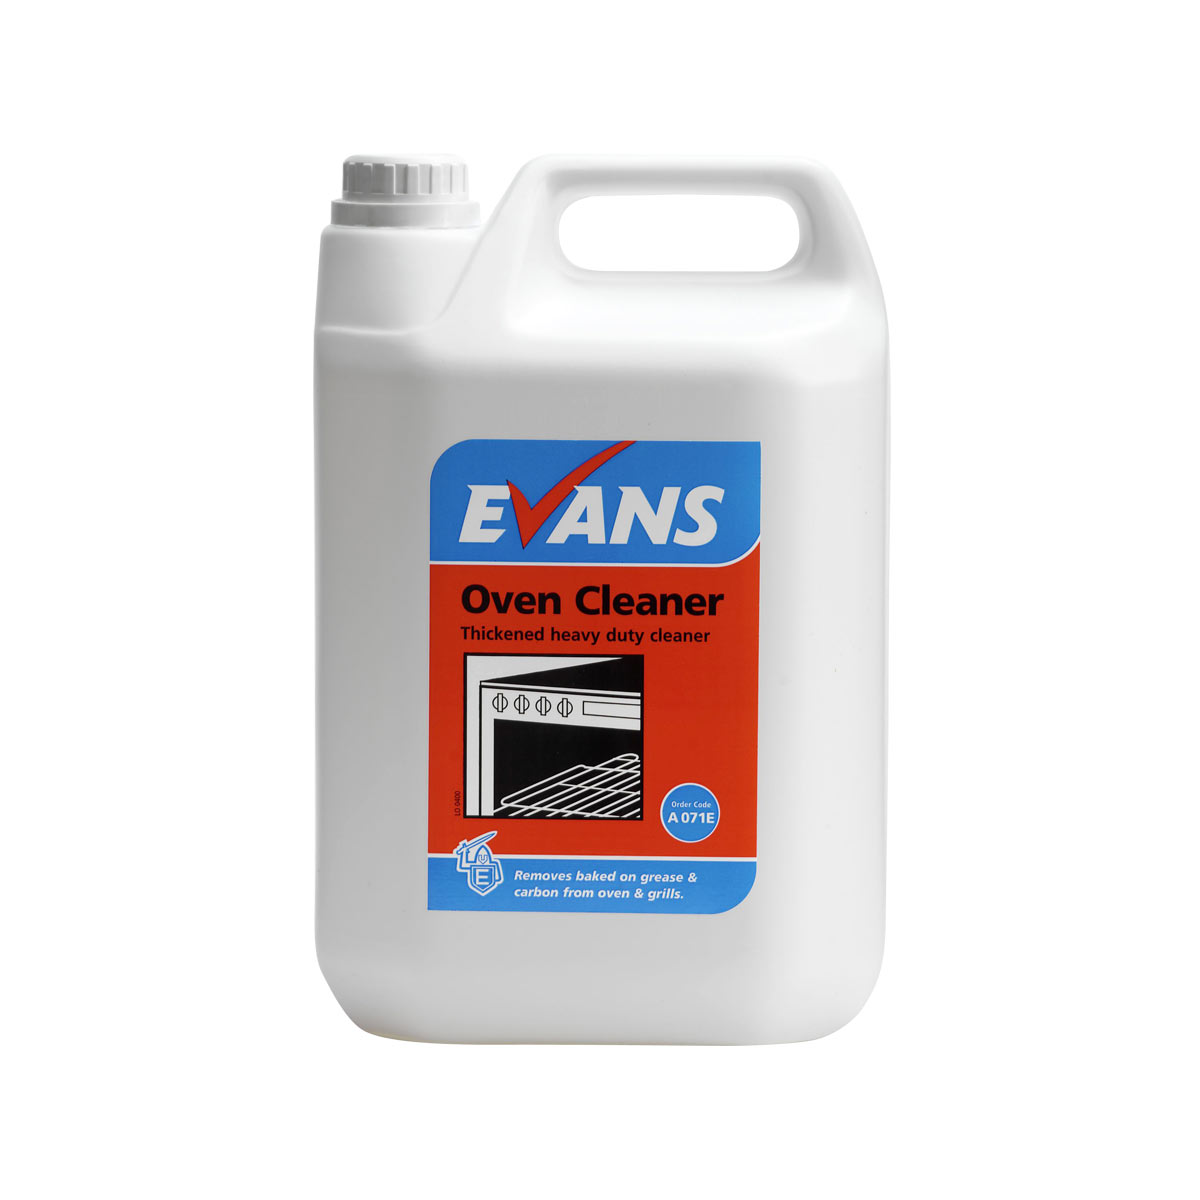 Oven Cleaner - Heavy Duty Cleaner